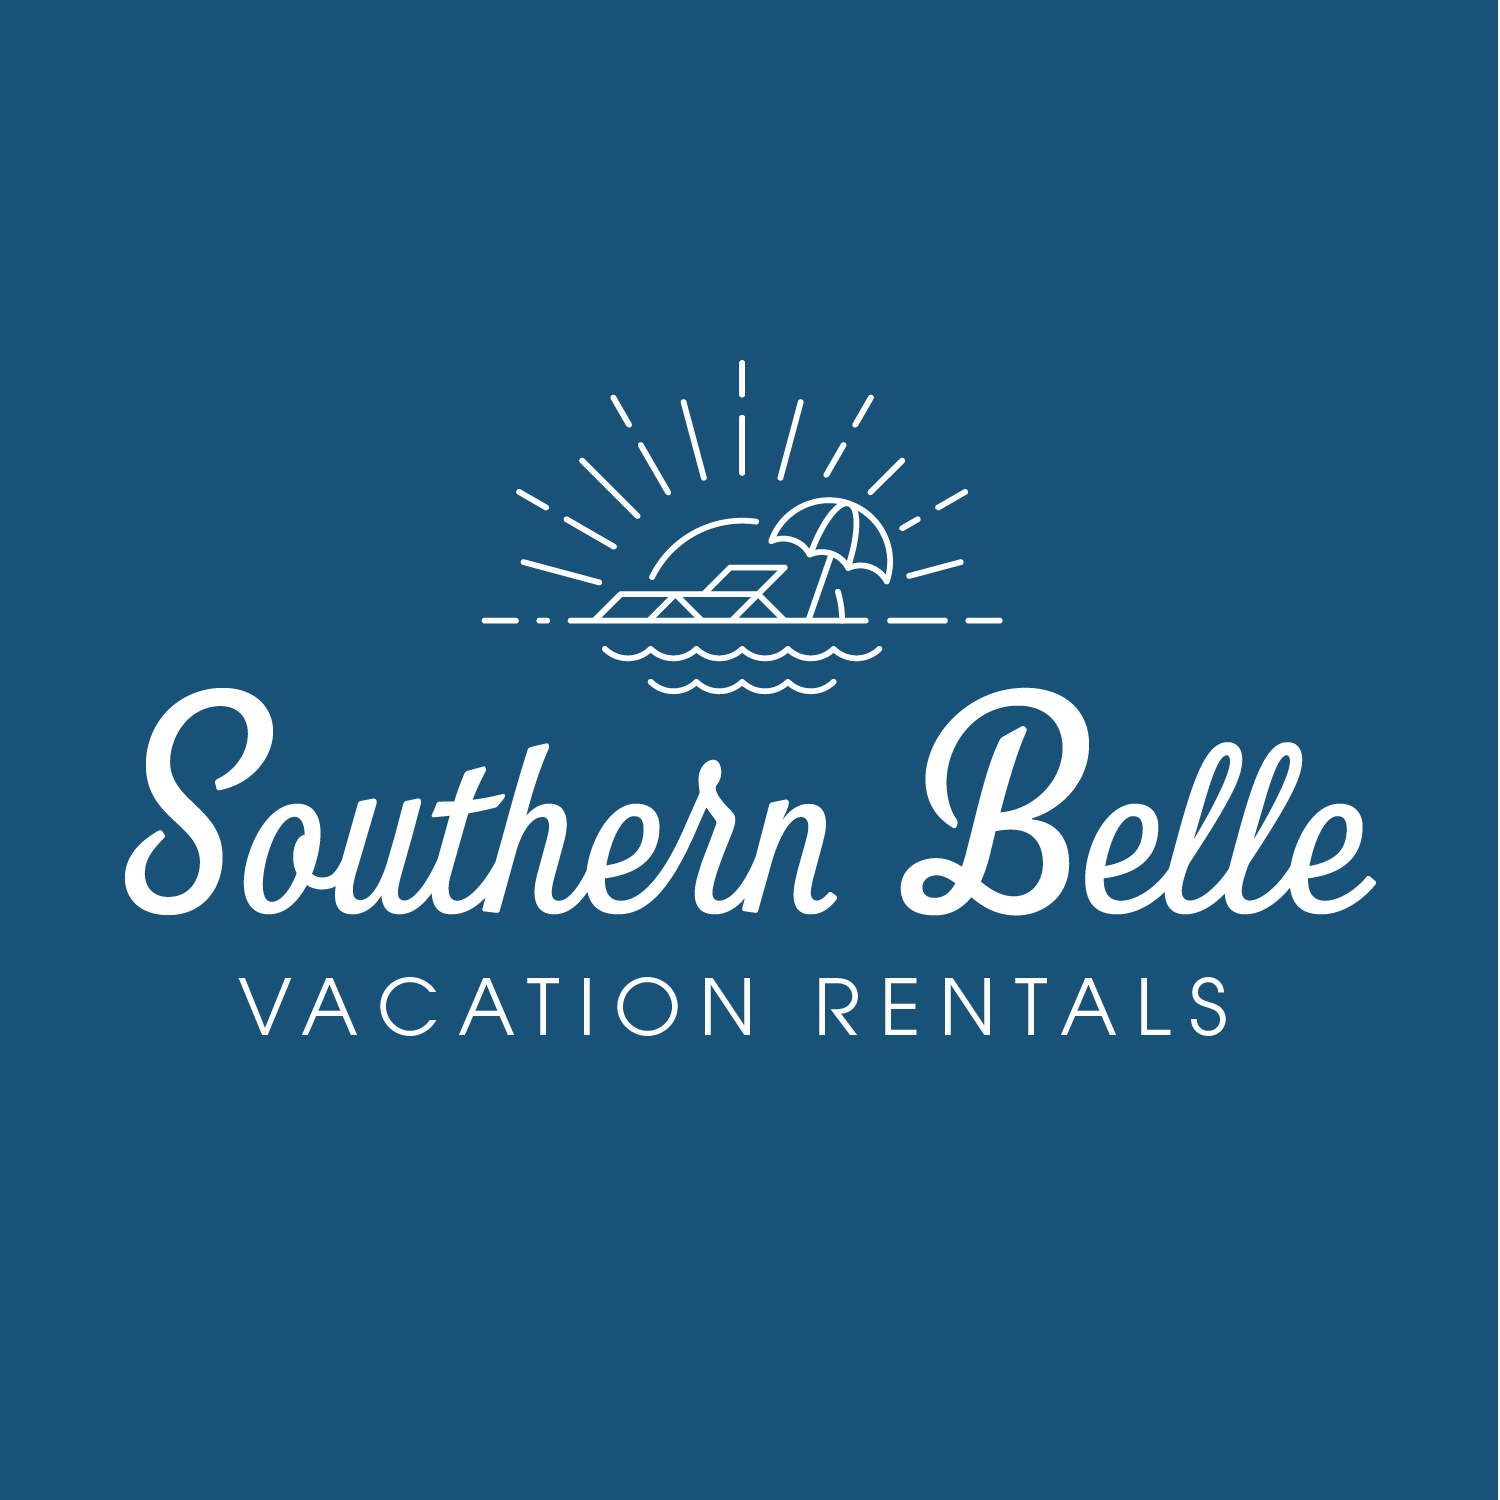 Southern Belle Vacation Rentals's Logo